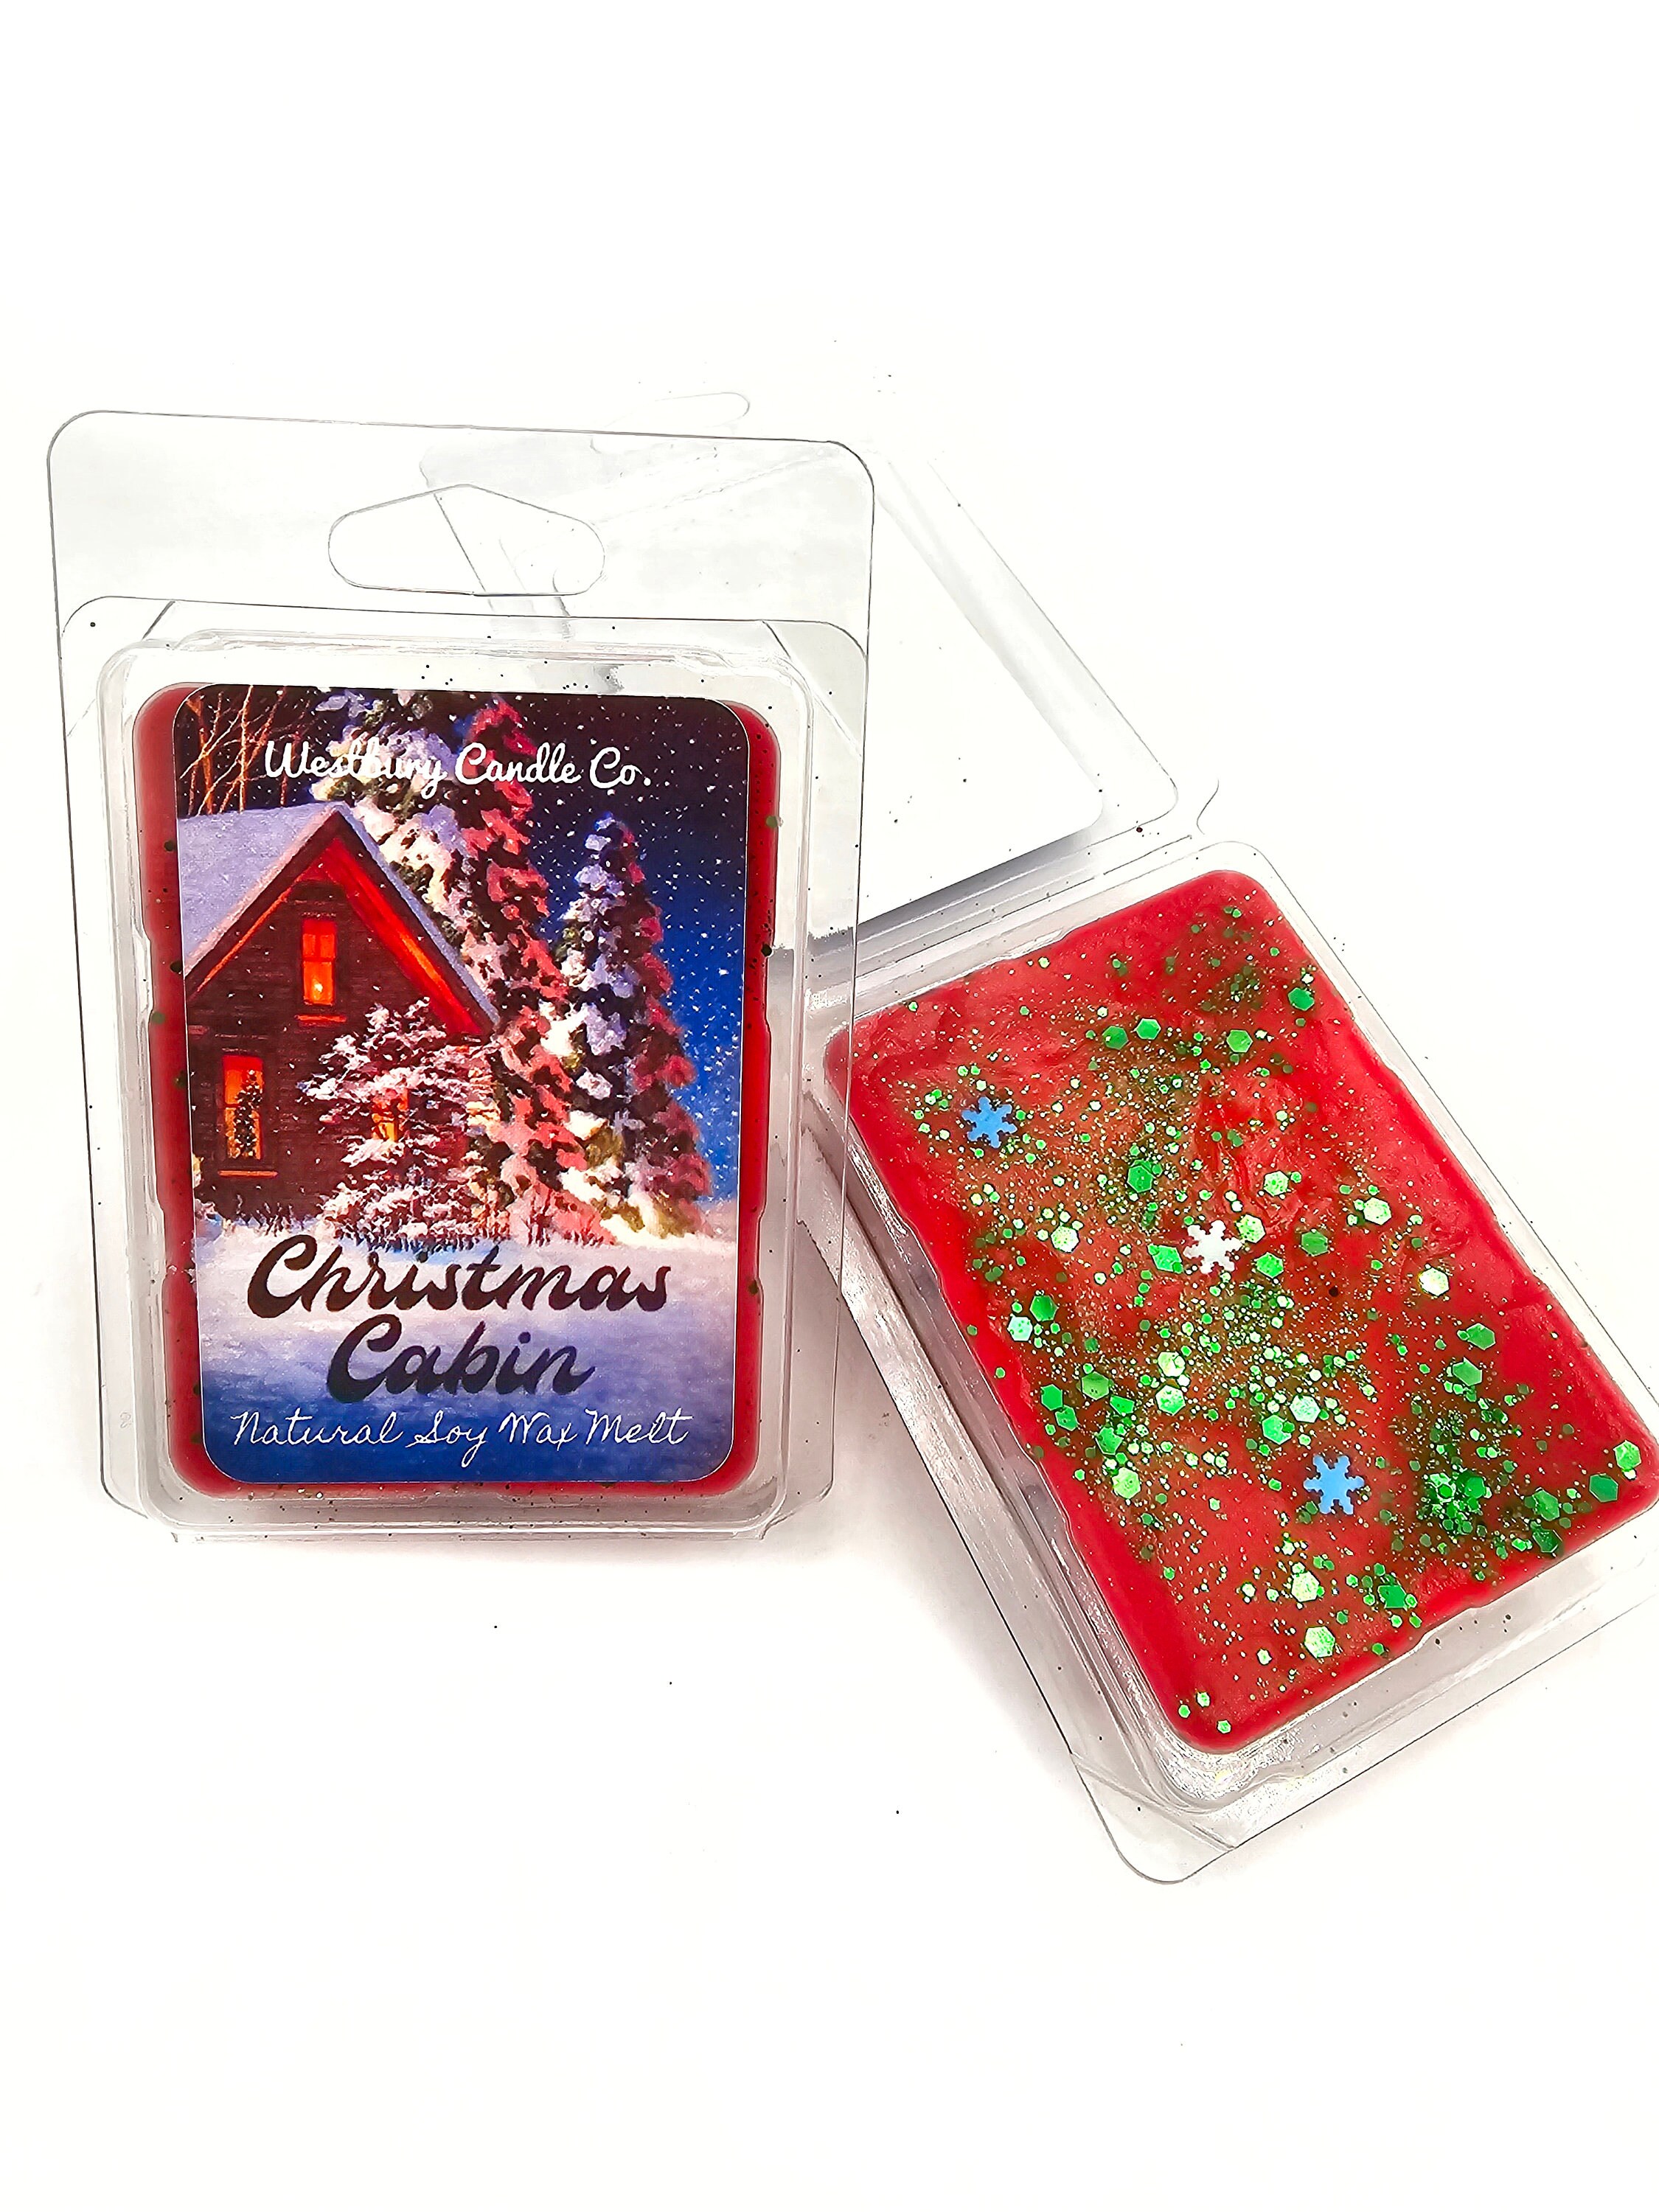 This is Christmas Wax Melt - Create a Cozy Holiday Ambiance with Pine,  Berry, and Cinnamon Scents – Goose Creek Candle